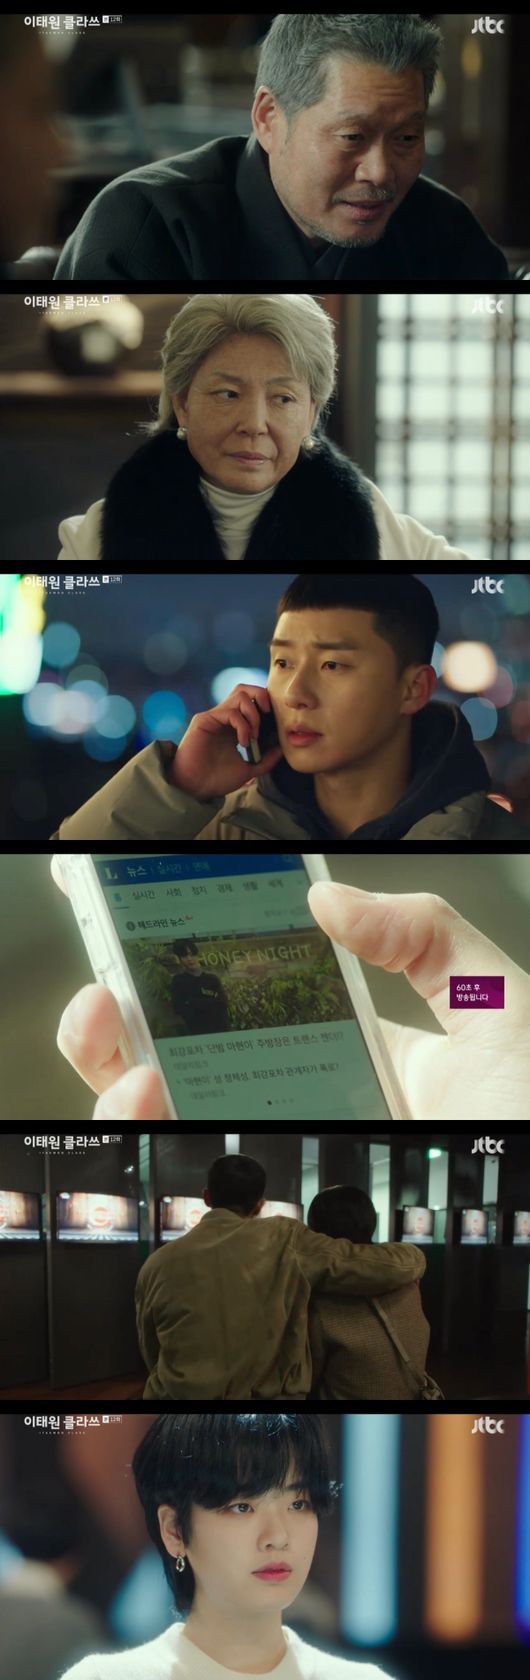 Itaewon Clath Park Seo-joon broke his pride and asked Kim Mi-kyung to invest, and Lee Ju-young went on a full-scale war with direct comments that he was a transgender.The scheme of the rich man was scratched at night, but it did not break down.In the JTBC gilt drama Itaewon Klath (director Kim Sung-yoon, playwright Gwangjin) broadcasted on the 7th, Park Seo-joon was portrayed as a crisis as 10 billion investments were turned into a wreck due to Jang Dae-hees scheme.Joe-yol Lee (Kim Dae-mi), who was rejected by Park for Confessions, drank soju alone and wiped away tears.At this point, Lee Ju-young returned to the store, and Ma Hyun-yi gave a warm comfort to Joe-yool Lee, who wanted to be alone.Joe-yool Lee asked him to take a vacation, as he suggested, and he was worried about him.I do the construction division, I just worked without a day off these days, Im going to make a change of mood, Joe-yool Lee said.Jang Dae-hee called SuA (Kwon Na-ra) and Jang Geun-soo (Kim Dong-hee) when Jangga stayed in second place in the MinorceFoa at night. So Jang Geun-soo said, It is a team-end employee.There is nothing I can do. At least I will not be unfair if I am moving. Jang Dae-hee called. It was The Fountainhead (Security).Jean said in tears, When my father abandoned me, I would have had no choice, and my father would have been sick.Then, The Fountainhead asked, Why do you do this to me? And Jang Dae-hee answered, Everyone is for Jangga.Lee Ho-jin (Idawit) hastily visited the Roy, and as Chungmyung Holdings, which has joined hands with Jangga, withdrew its investment, followers have been out of line.The night, which has not yet received the investment, has been hit hard.The franchise owners had a riot at the end of the night, among which SuA brought a pot with a message: Do the Anbundji () from Baro Jang Dae-hee.All this was his painting.Jang Dae-hee said that Jang Geun-soo had joined hands with Chung Myung Holdings from the beginning. Jang Dae-hee said, Who invests 5 billion won in a small store?It is as big as he does his best. Jang Geun-soo asked, Just to trample Roy. Jang Dae-hee said, To trample Roy? It was enough to move, but Chung Myung Holdings is hard to control.I needed to show it. This Jang Dae-hee is an old man with a pinch. Jang Geun-soo provoked Jang Dae-hee, saying, I know my father is great, but I do not know. Did you care so much about someone who collapses like this?SuA stopped the revenge of Roy, who said, You cant just stop, you keep hurting and hurting like this, youre errands, and I dont know how I felt when I brought that pot.How long do I have to do this to you?You said, Our relationship, its my decision. Revenge for the house, hate it, come to me.Just in time, Joe-yool Lee called, who apologized to Joe-yool Lee, saying, I am the representative. Dont carry everything.You trust me, too. I dont fall this far. This is nothing, he said.The real big thing is when my father was cut off from his job for 20 years, when his father was hit and run and his death was covered up.I could stand up and promise revenge. Before that, I can not have my happiness. I will break down the house, I can not put it down or stop it before that. This was also an indirect rejection of SuAs Confessions, which, in turn, SuA sat down and fizzed, but Roy said he was sorry.Kim Soon-rye (Kim Mi-kyung) visited Jang Dae-hee, who said, Do you want to get old and bother the child like that? and gave Jang Dae-hee a pinjam.I was blessed, I hope I dont touch it anymore. But Jang Dae-hee said, At first, I was light-hearted to fix my habits.But now it is the last reason of this life to kneel down once. Joe-yool Lee closed his vacation and started working again. Roy asked Joe-yool Lee if he was feeling better.Joe-yool Lee said, I like it so crazy. I like it so much that I did not go to college and work at night.If you dont want to be rewarded, dont tell me to get it straight, if this is a reason to get fired, Ill take it.I cant imagine a single night without you, he said.Kim Soon-rye visited Danbam as an investor, but Park refused to invest in Kim Soon-rye, saying, I dont want to make a deal about Tony.Kim Soon-rye also said, I have no money, I have no ability, I have a big dream. I can clean my family because I have to suffer.But Roy changed his mind when he saw MinorceFoa and the single-night family trying to invest.Park also found out that Joe-yool Lee had visited Kim Soon-rye, who went to the Jeju Island villa.Roy bends his pride and asks Kim Soon-rye to invest, and Kim Soon-rye says: If you invest, its not just Tony.I liked the sight of food, shops, and streets. I do not like to waste money. What is your goal? Park said, It is the first in our country.Kim Soon-rye laughed and said, I can not say who can not. Prove it by action. I promise to invest if I win the cooking show.Joe-yool Lee took over the phone, who told Joe-yool Lee, Im so sorry and thank you. Joe-yool Lee said, OK, I love you.Good night, I dream, he said, and once again he made a stone fastball Confessions.The final day of the MinorceFoa was bright. Jang Geun-soo reported to the media that he had been operating on the transgender surgery.To win, I said, This is the way of the house.Shocked, the maroon fled, wandering the station, and said to Park, who found him, Im sorry. I didnt run. My legs are loose. Ill be alert and ready for Baro.I thought it was going to be time. And I get investment when I win. No problem. I can do well. Roy told Marhyun.You are the bravest and most beautiful woman whoever says. Then Park said, You can run away. No. I have done nothing wrong.I do not have to convince others that you are you, said Ma Hyun, who tried hard to catch up with her, poured tears into her.Joe-yool Lee called Ma Hyun-yi and read a poem about a message of comfort.Im a transgender, and Im going to win today, said Ma Hyun-i, grabbing the microphone.Itaewon Klath captures broadcast screen